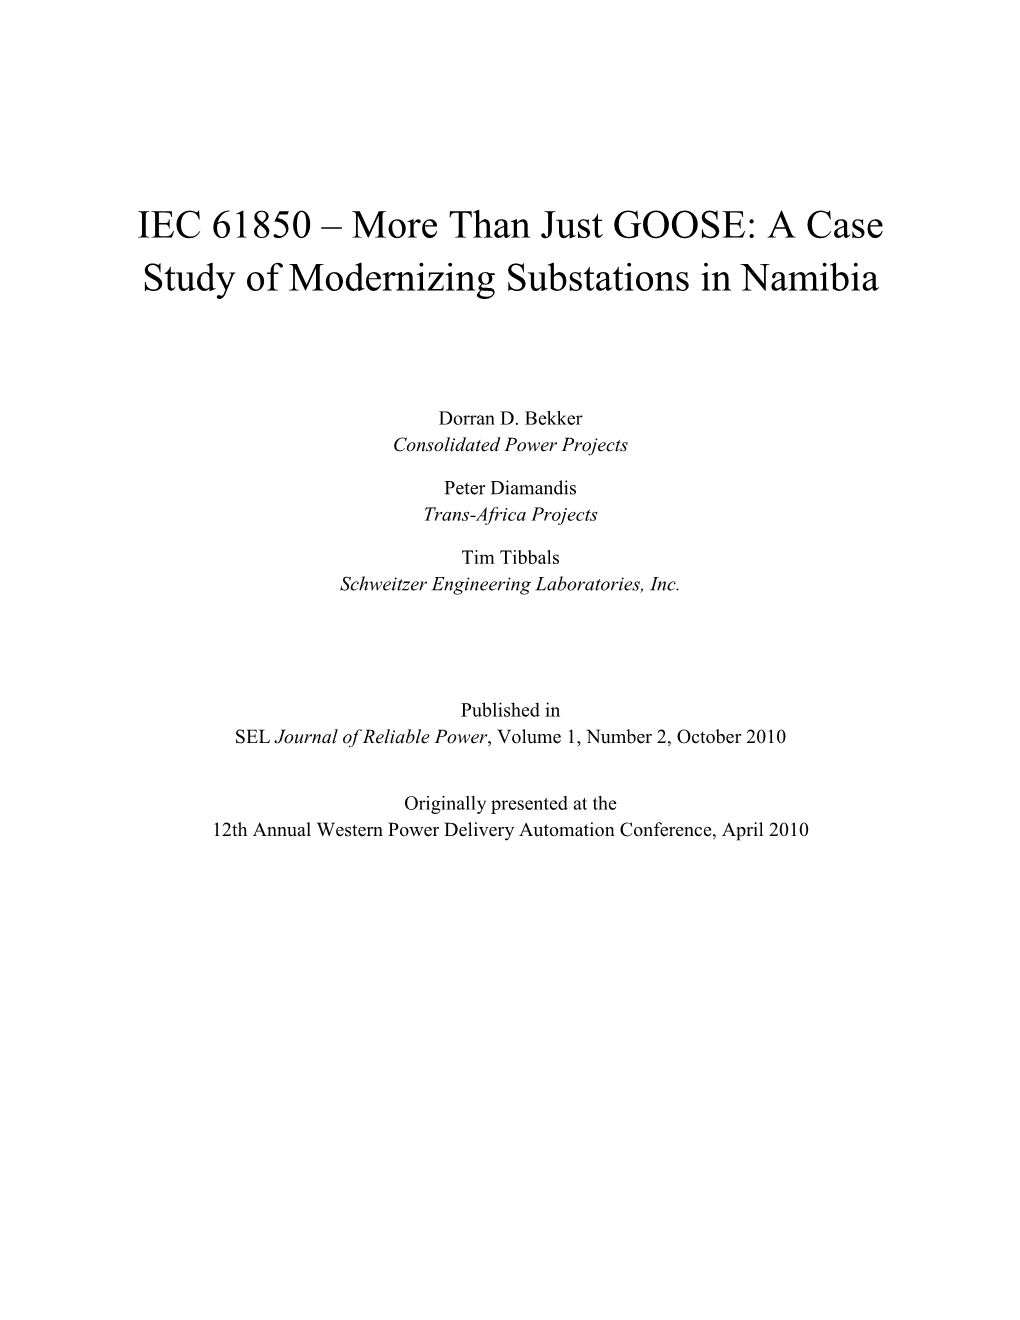 IEC 61850 – More Than Just GOOSE: a Case Study of Modernizing Substations in Namibia